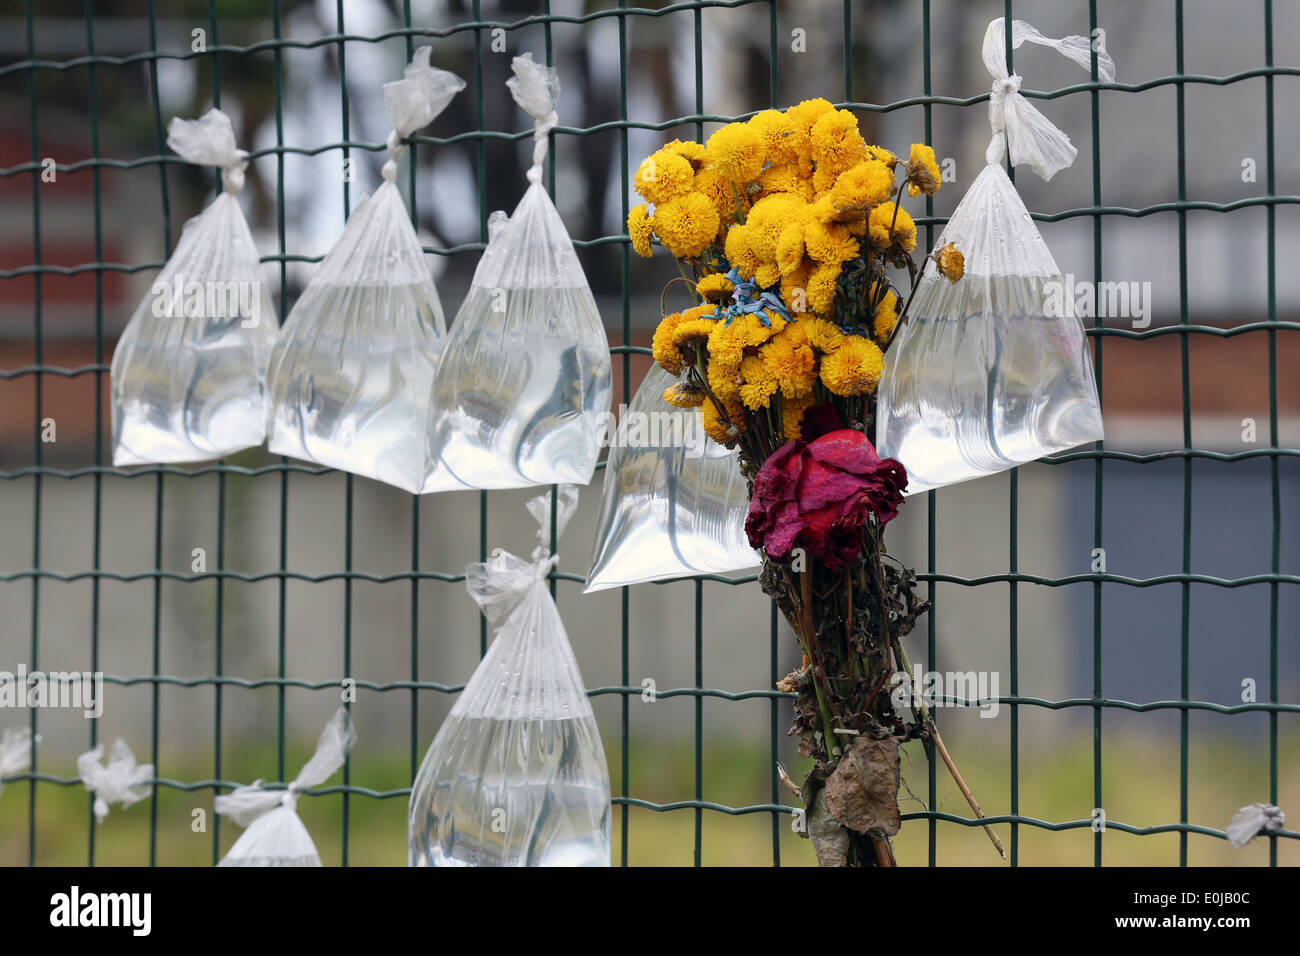 Tansparent plastic bags with water on a fence of the churchyard of nameless dead persons. Bogota, Colombia, South America Stock Photo